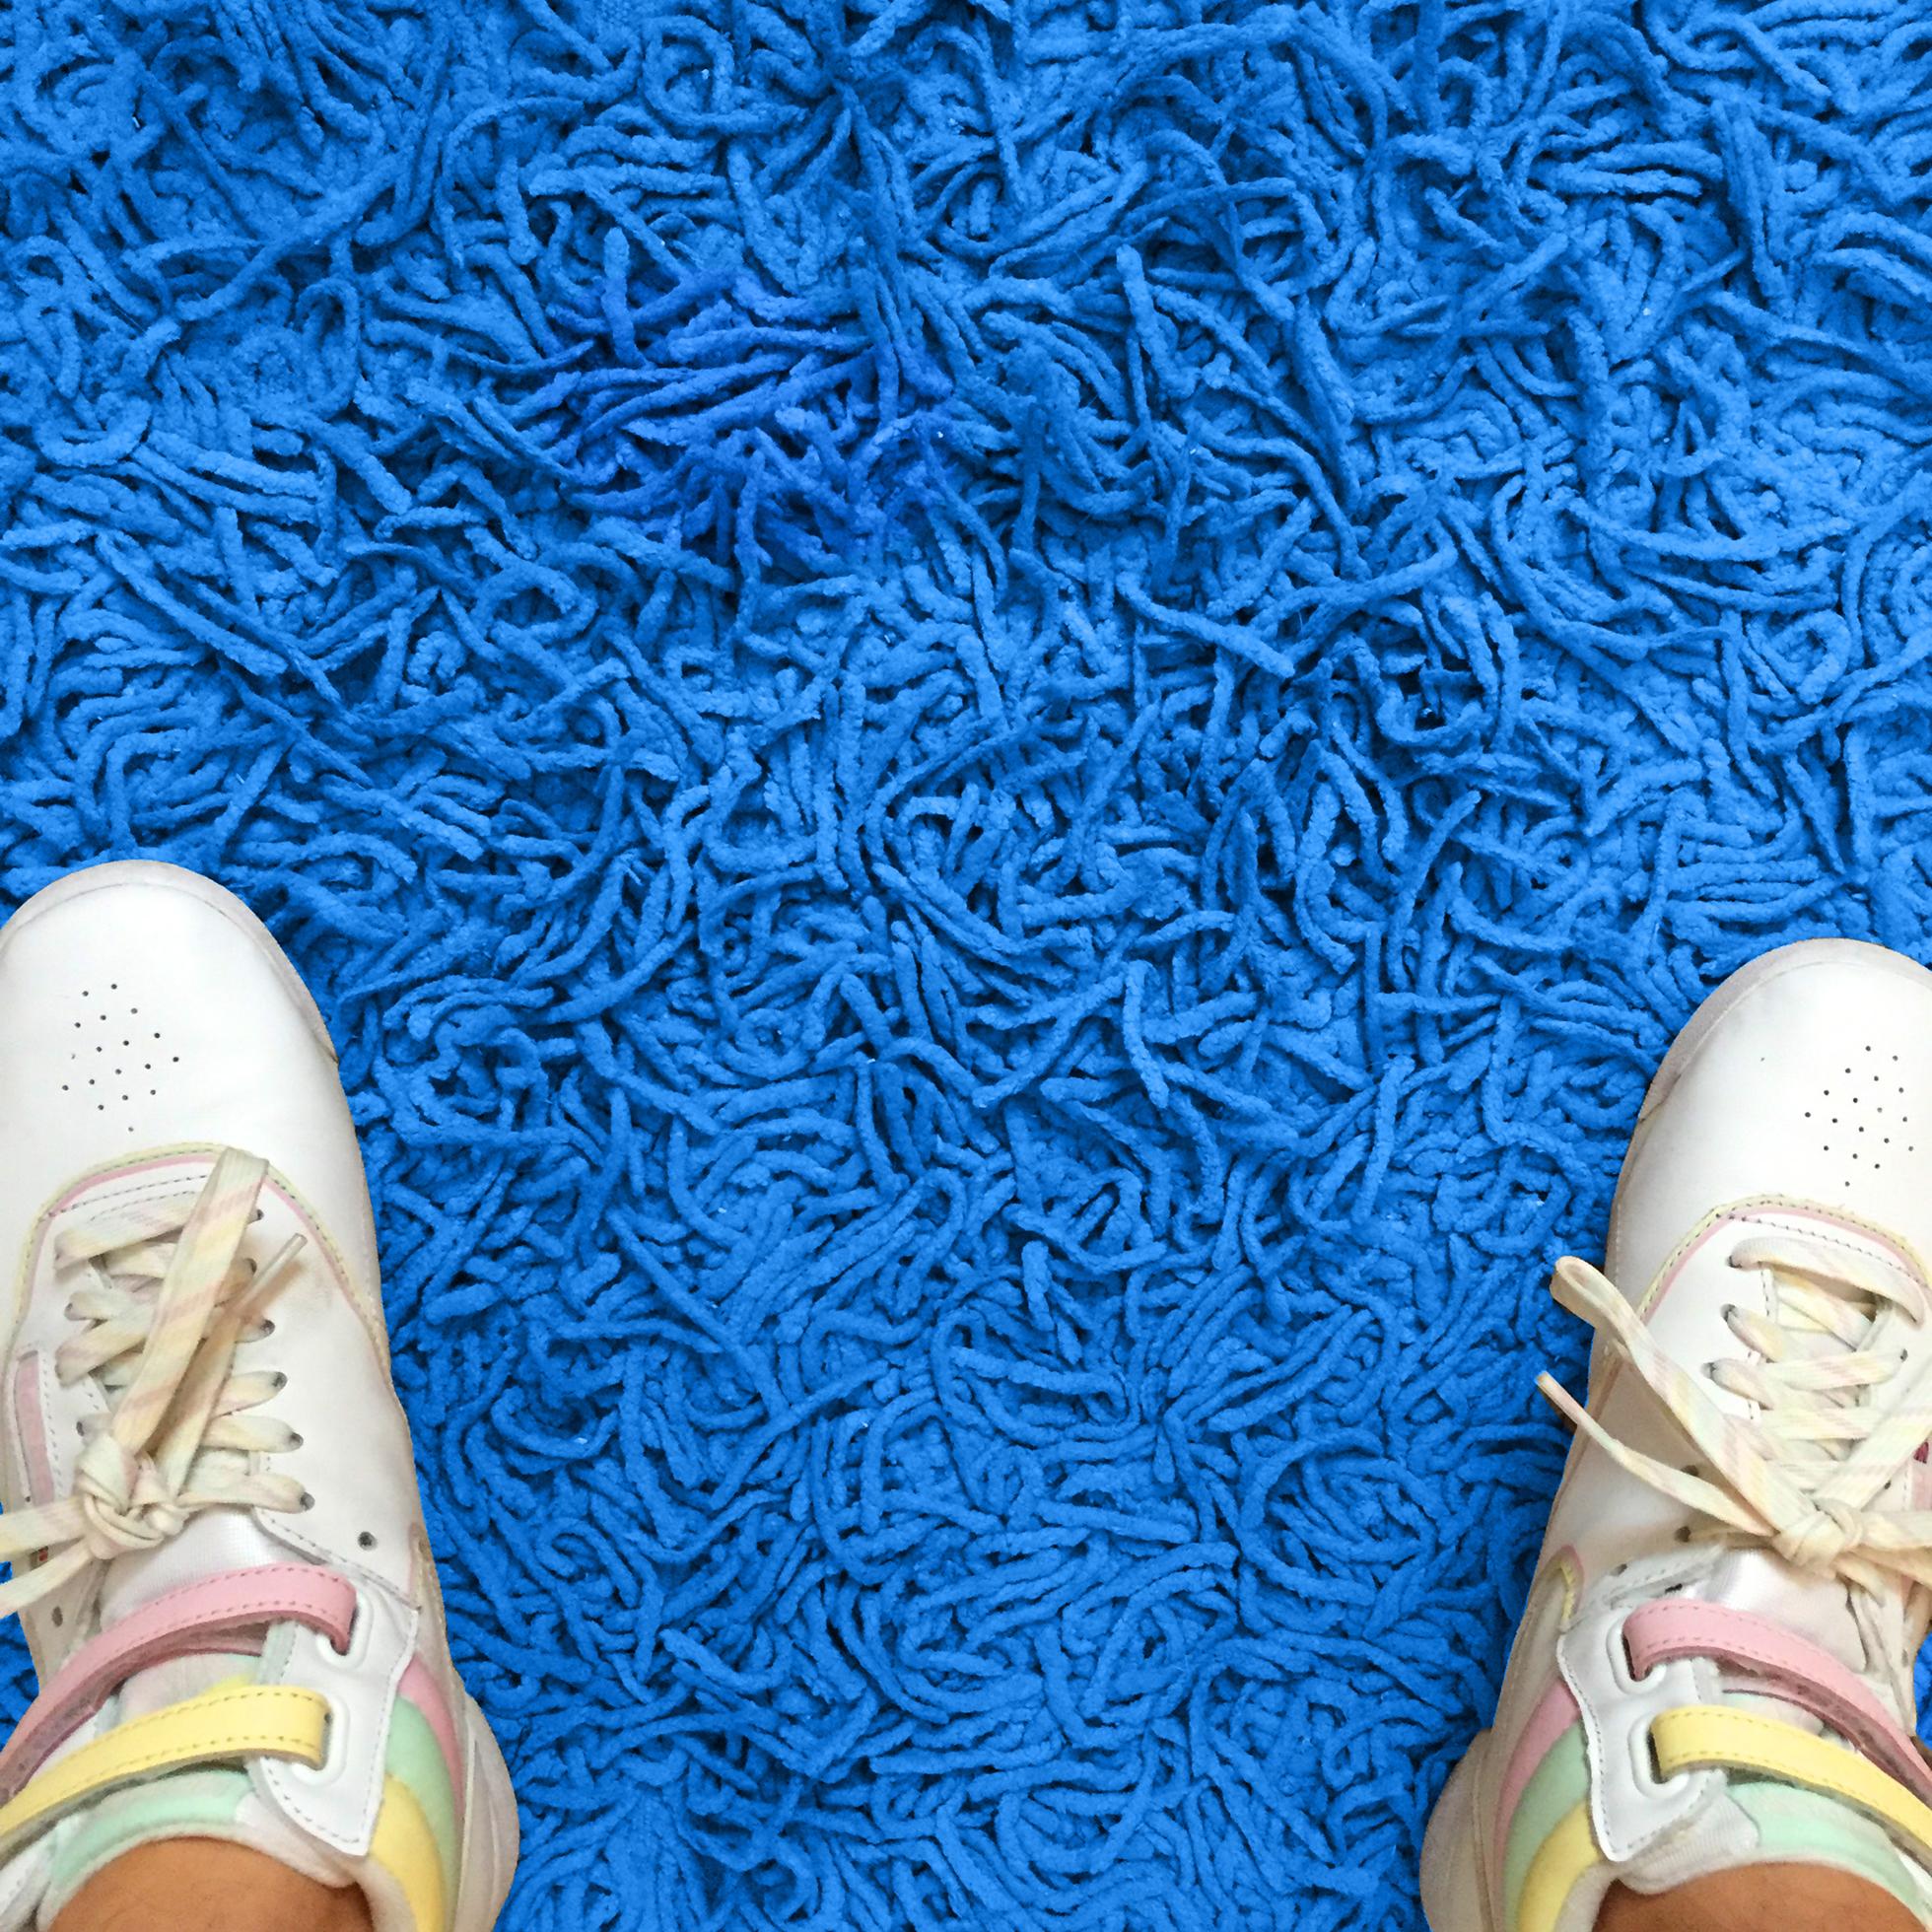 Overhead view of white sneakers planted on blue shag carpet